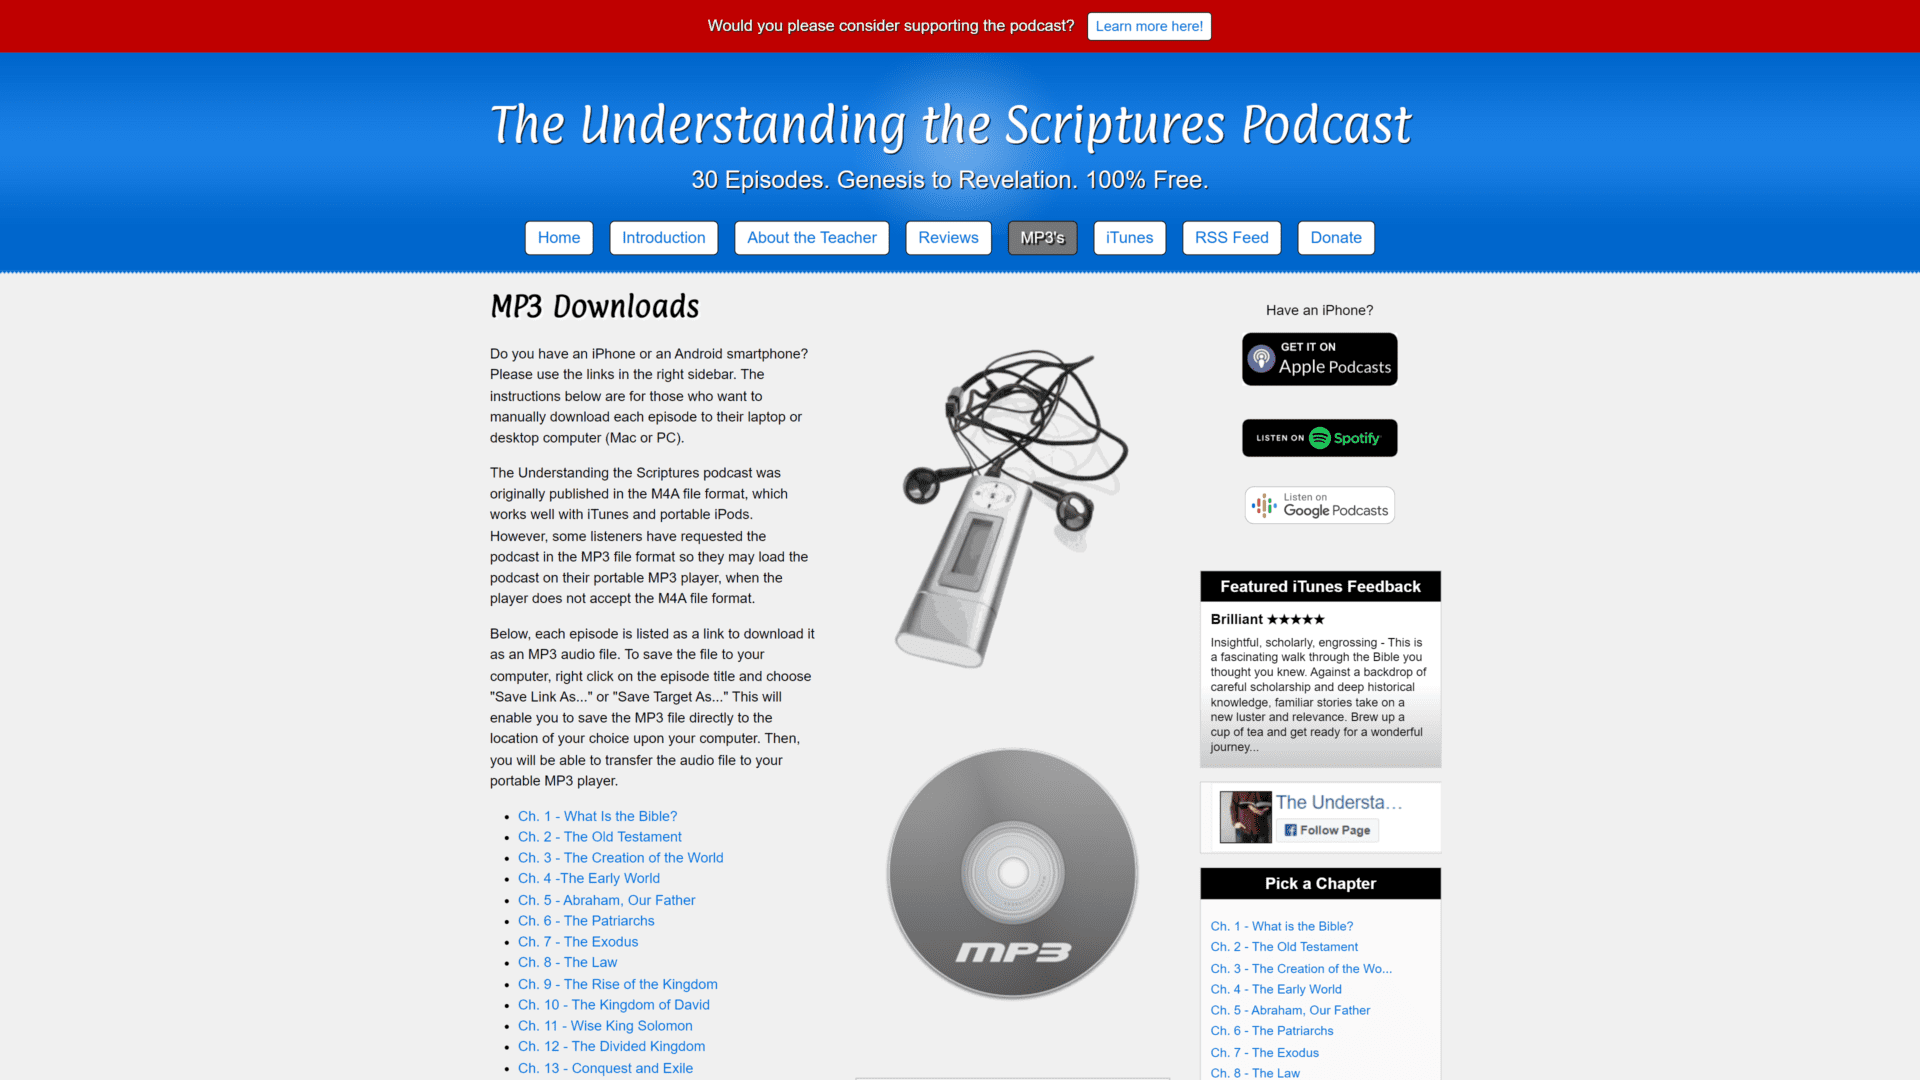 A screenshot of the understanding the scriptures podcast homepage